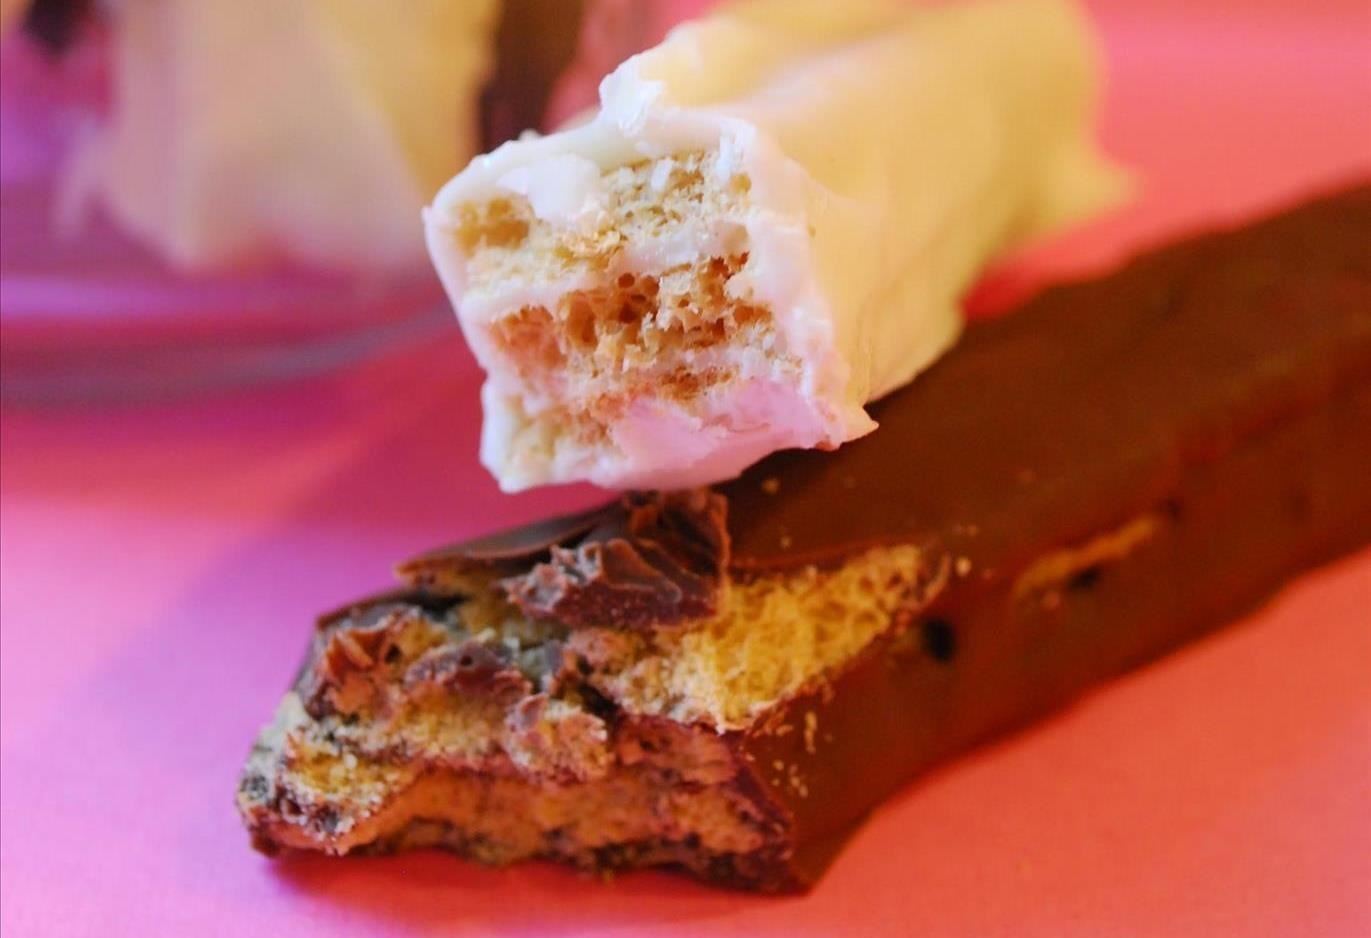 DIY Tastes Better: How to Make Homemade Kit Kat Bars in Any Flavor, Color, or Size You Want